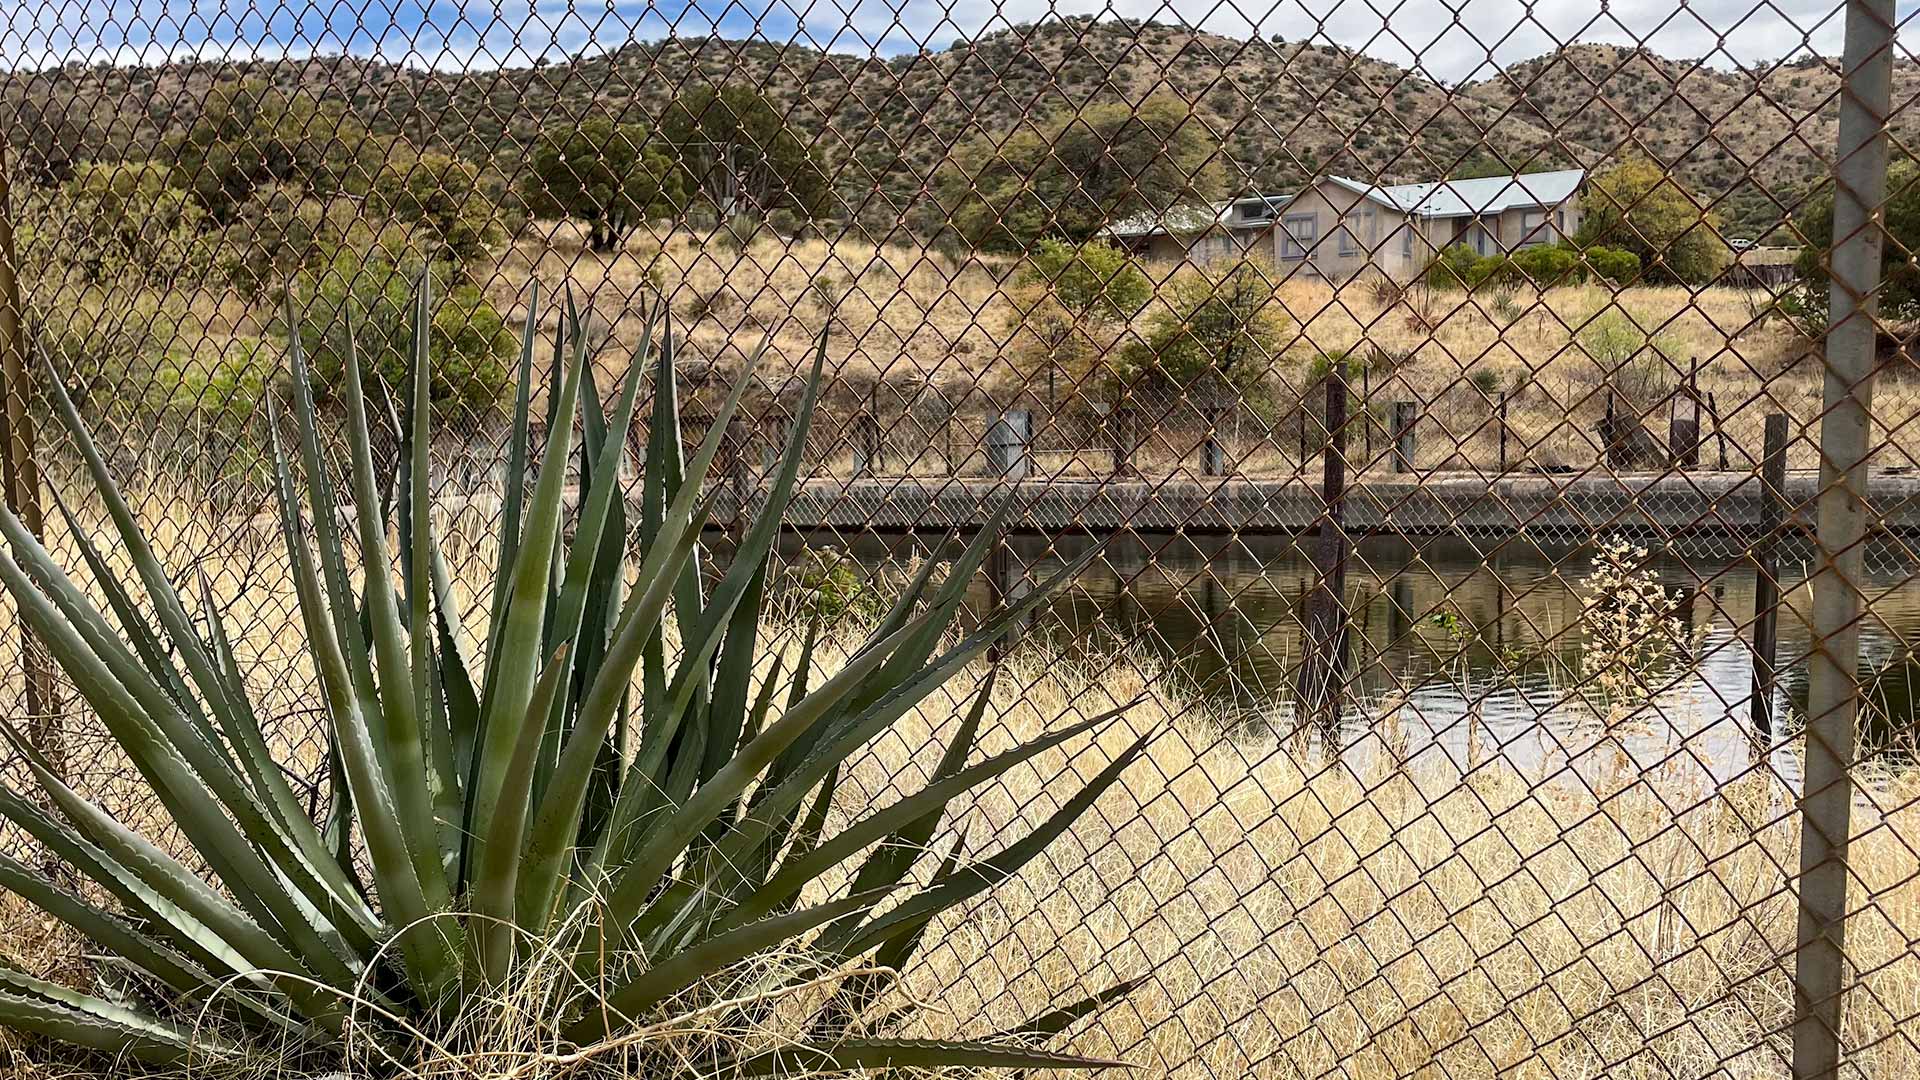 A reservoir sits high in the hills of Bisbee. The water here goes to fighting fires in town, and city officials are looking to replace it with a more up-to-date system. 